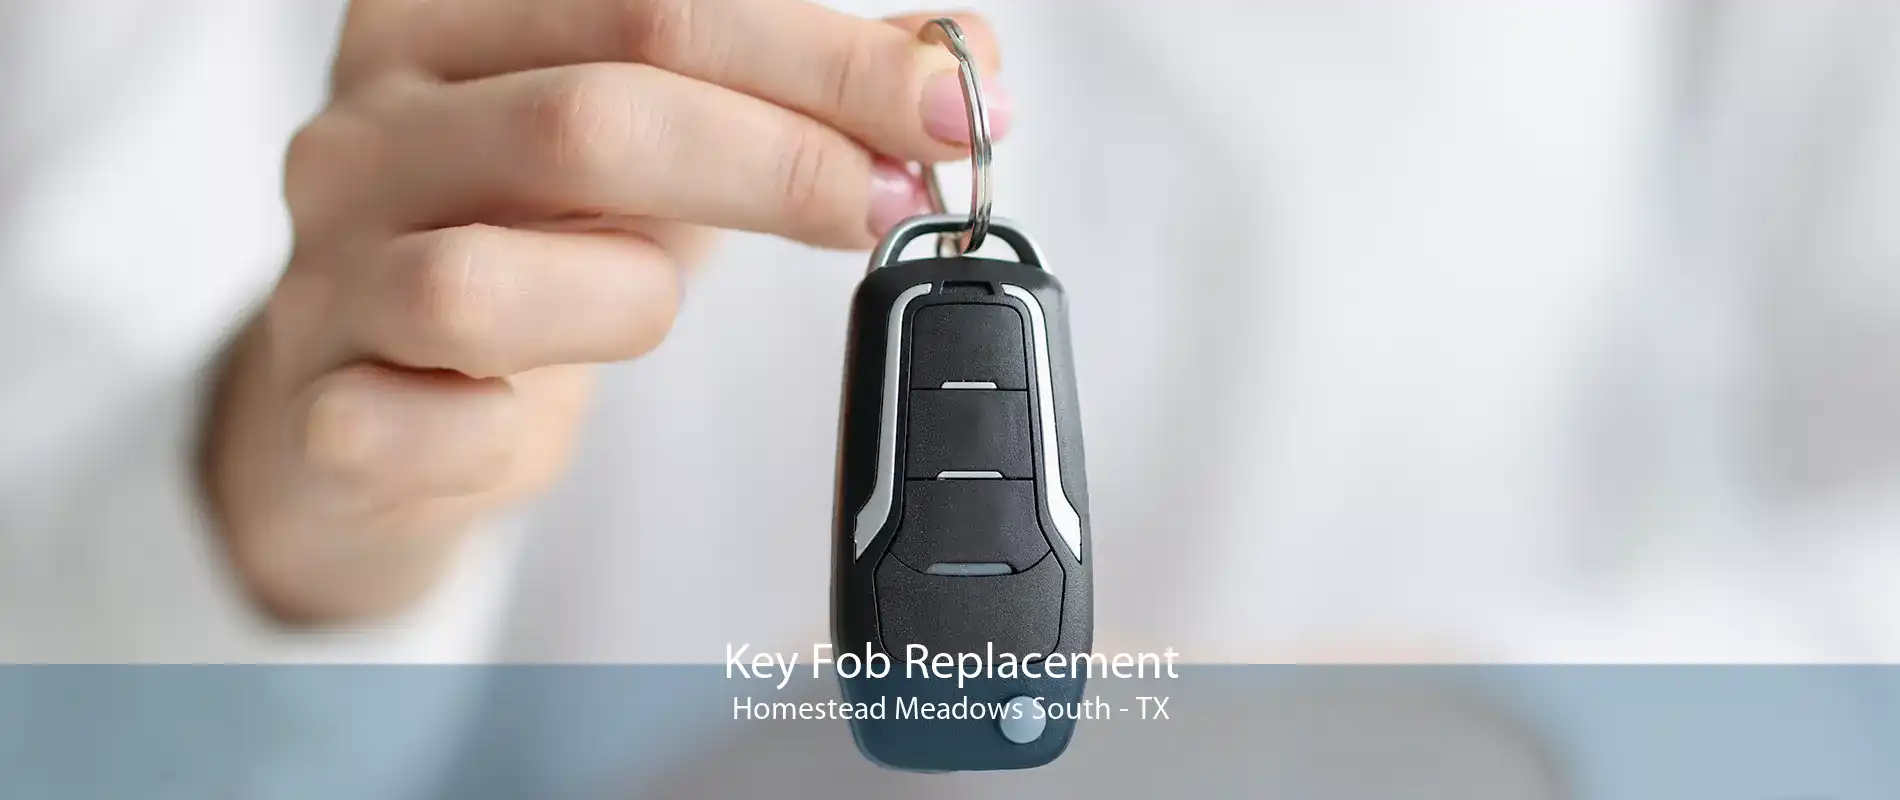 Key Fob Replacement Homestead Meadows South - TX